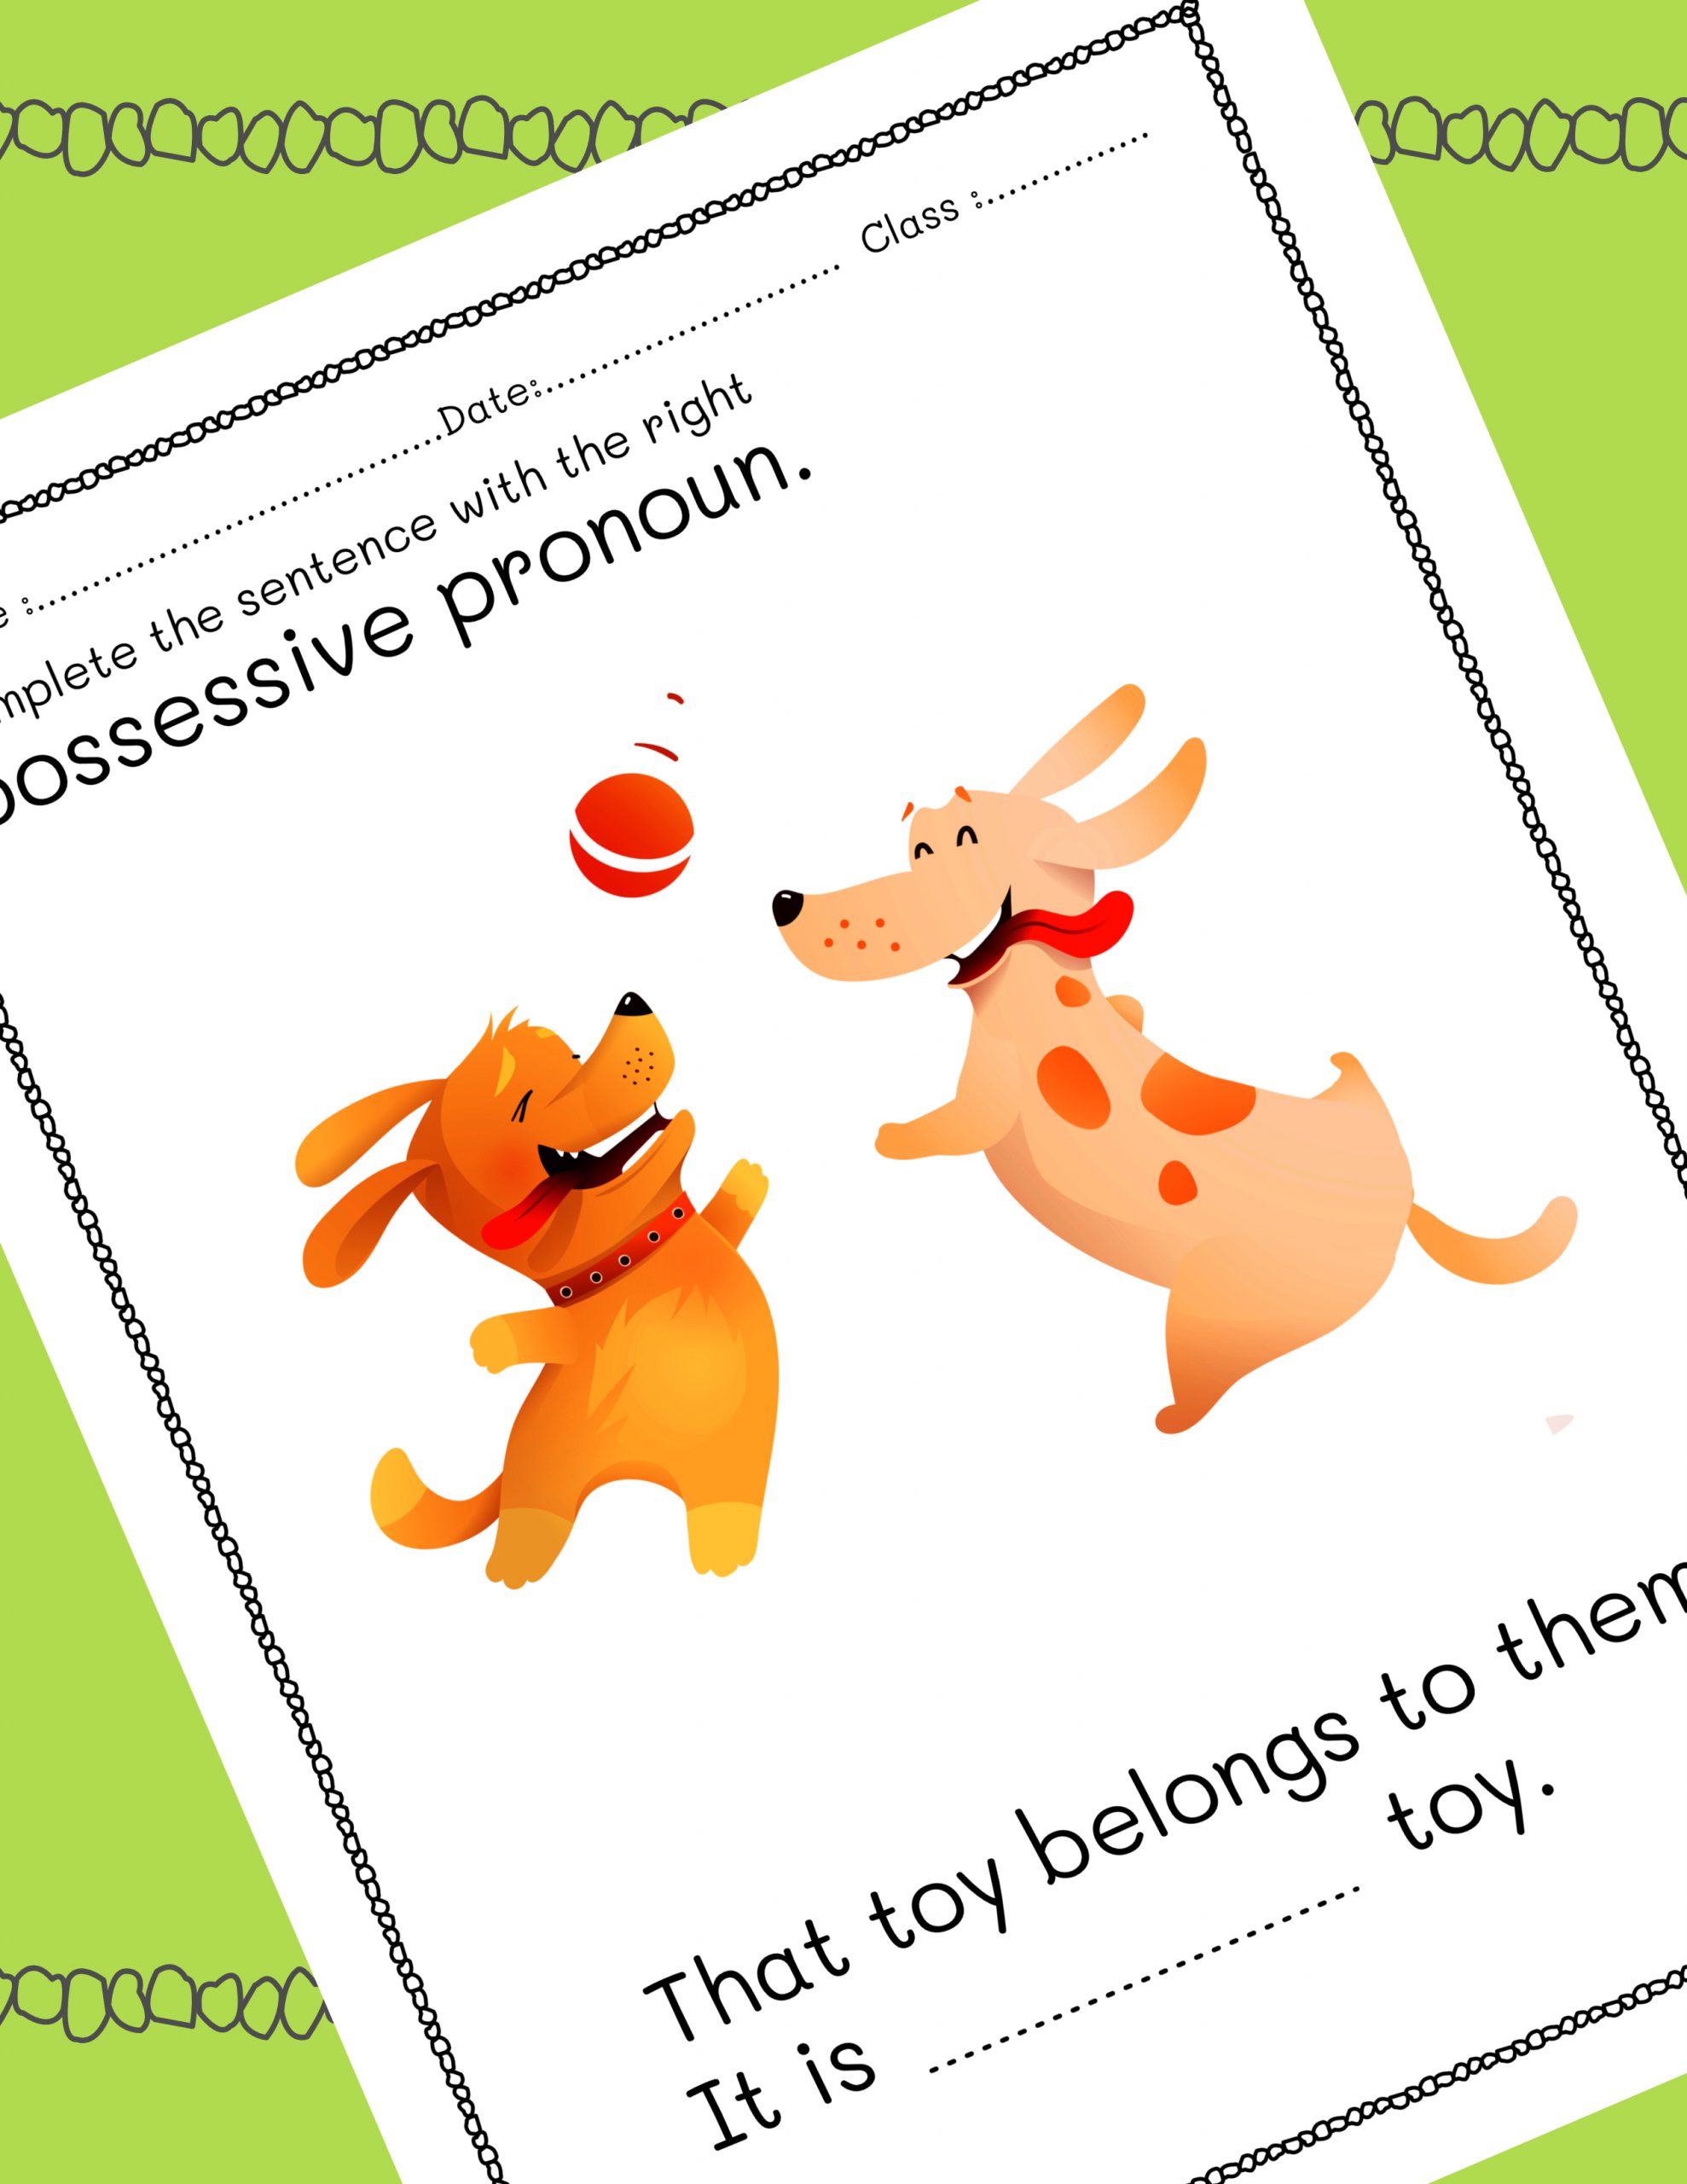 Personal Pronoun Puzzle: Completing Sentences with the Right Pronoun